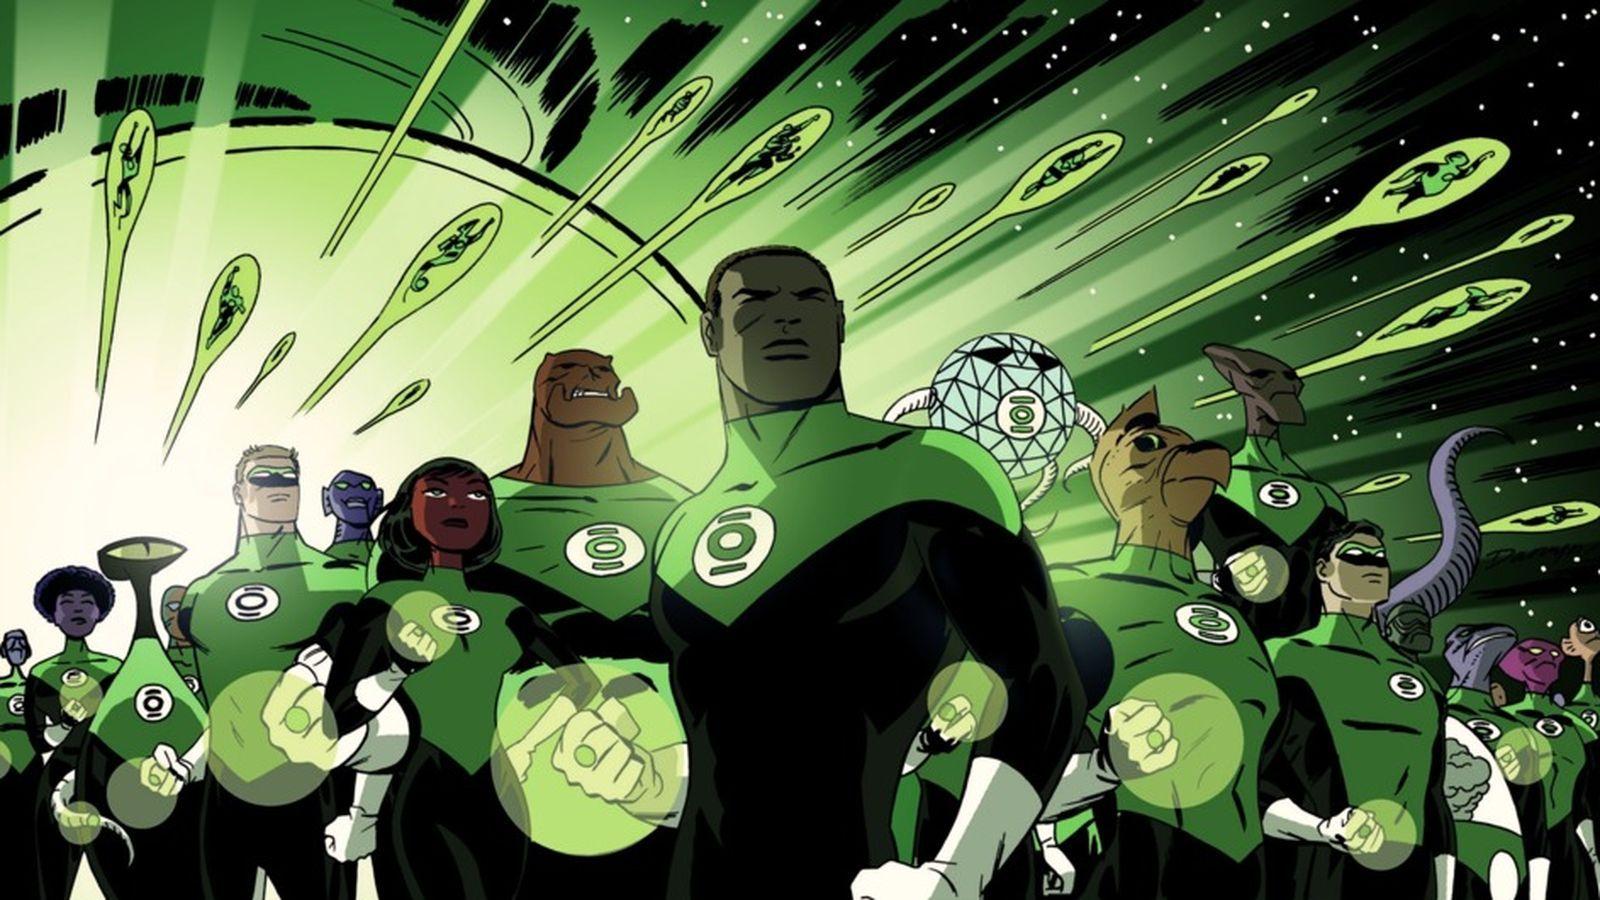 Green Lantern Corps. film confirmed to be in production